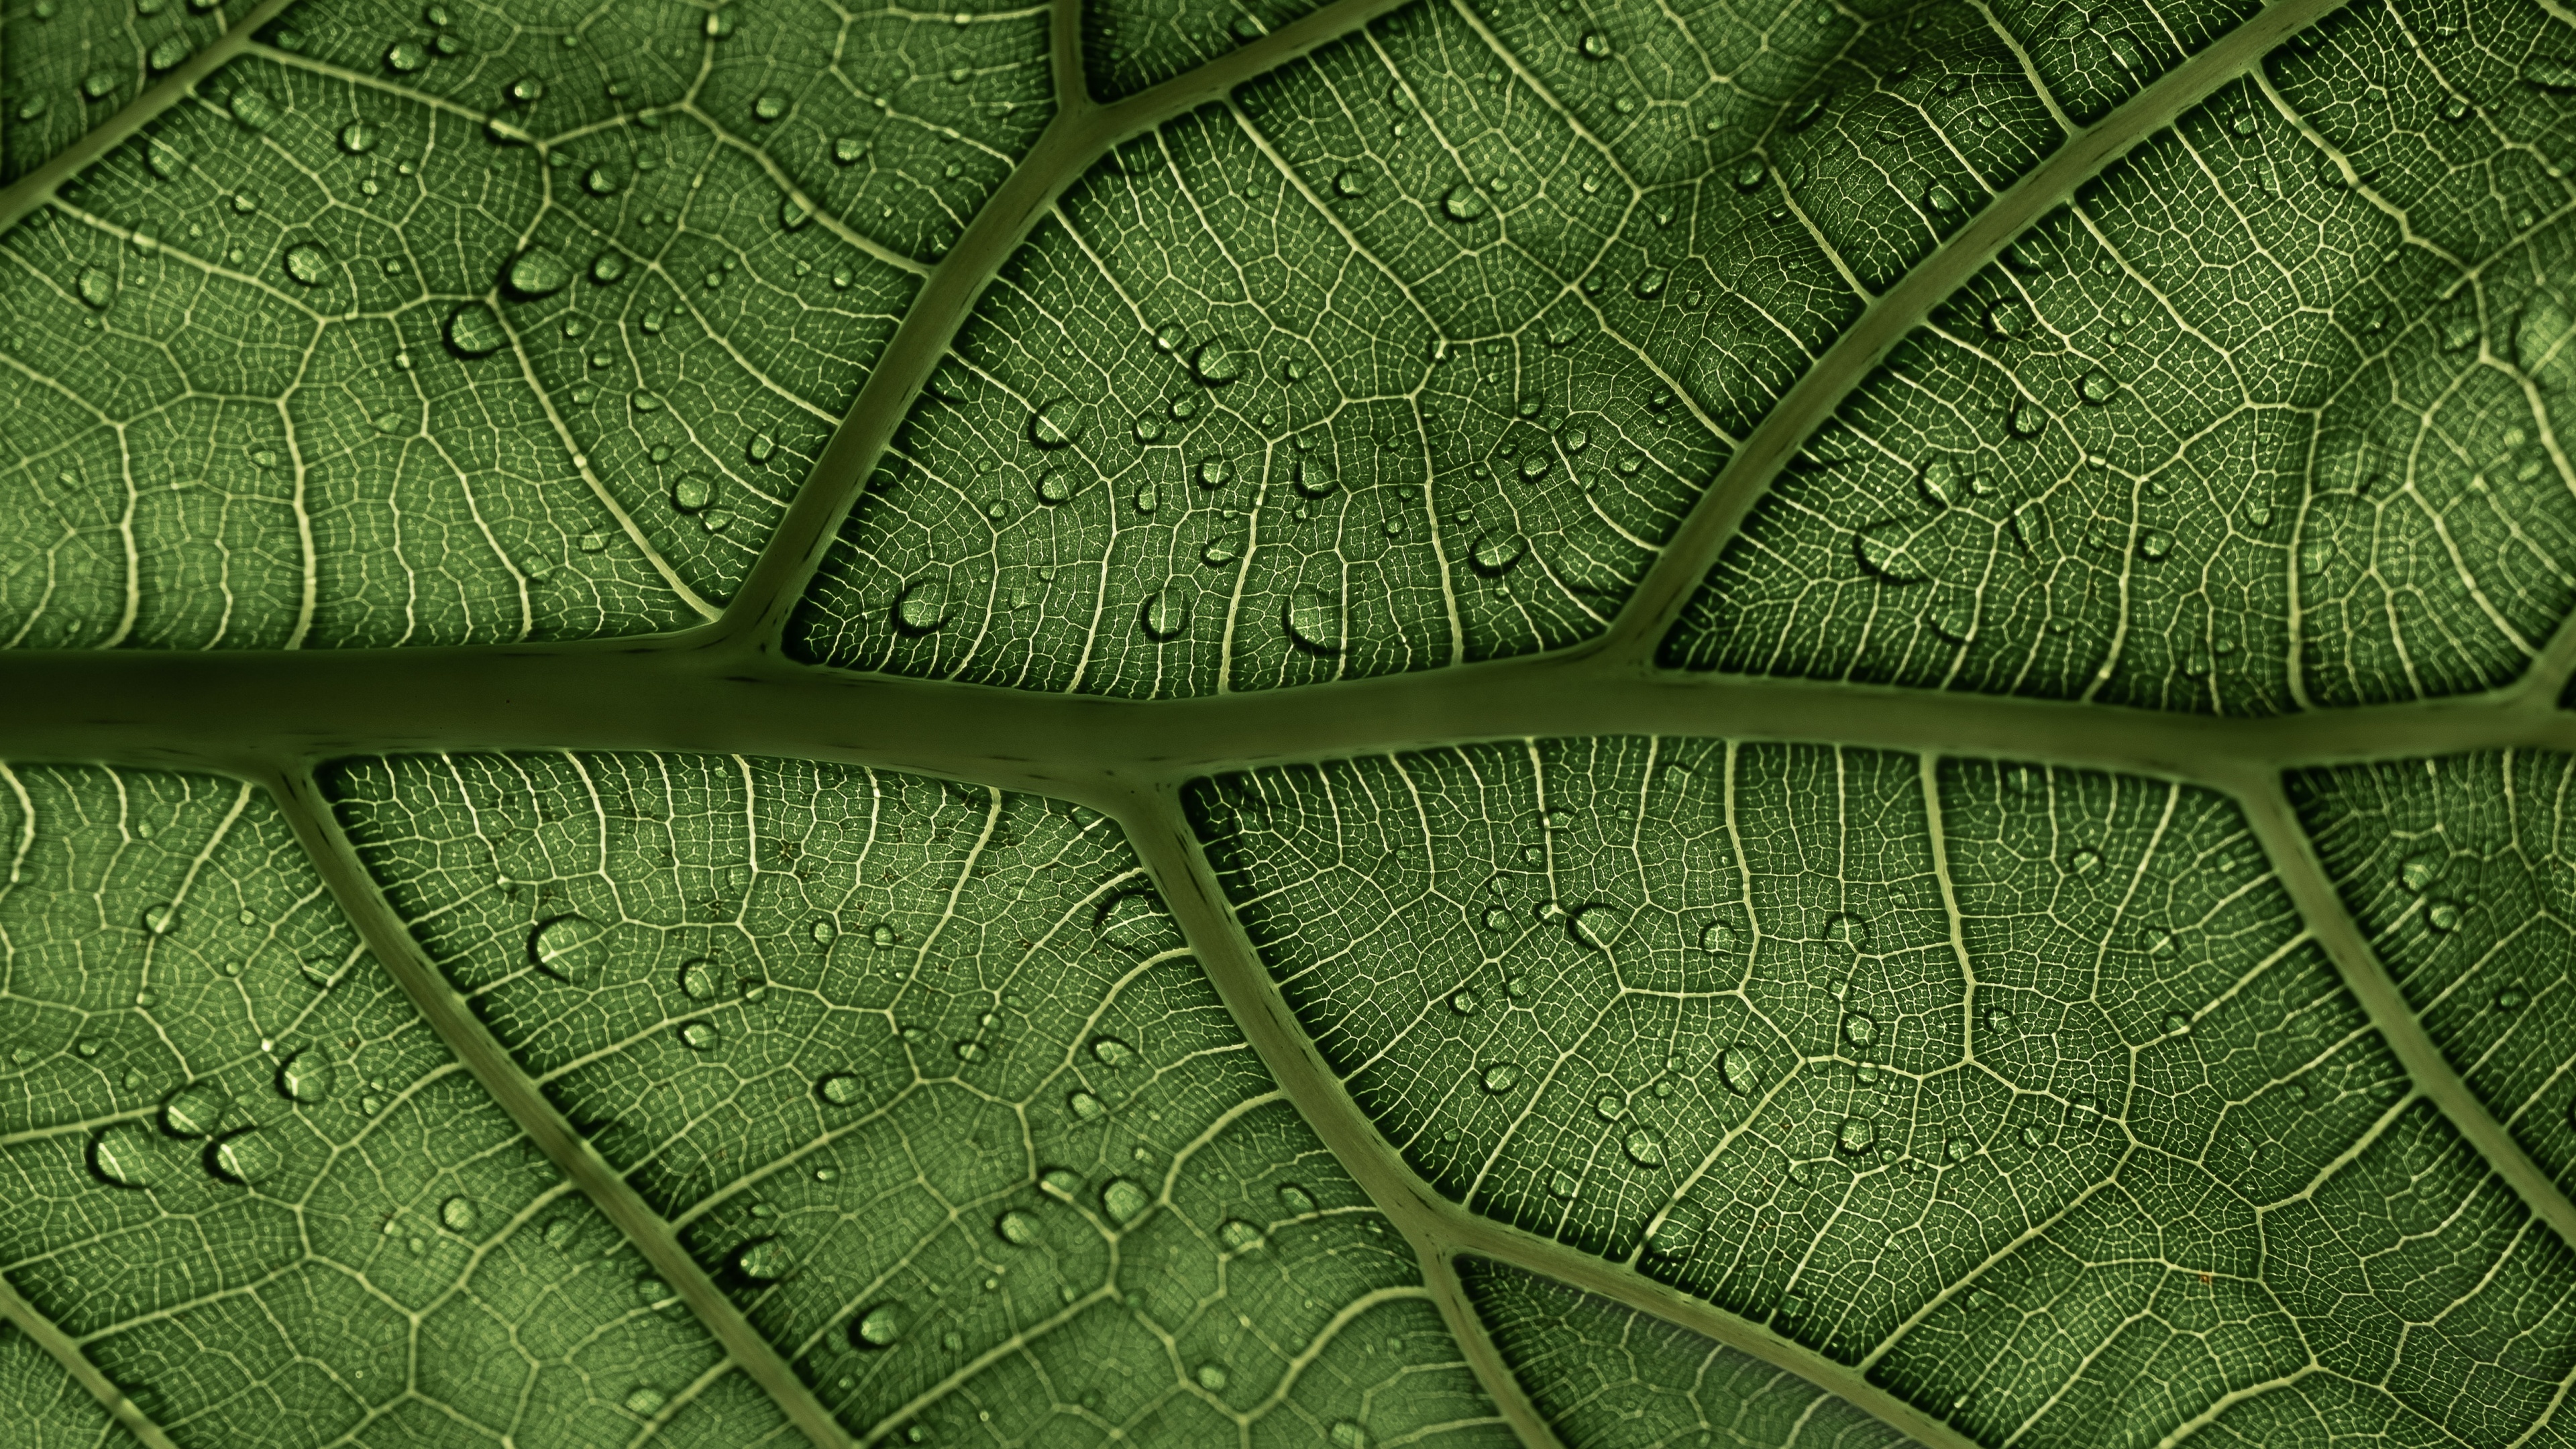 Green Leaf: The close-up texture of a complex leaf covered with dew water, Primary vein. 3840x2160 4K Wallpaper.